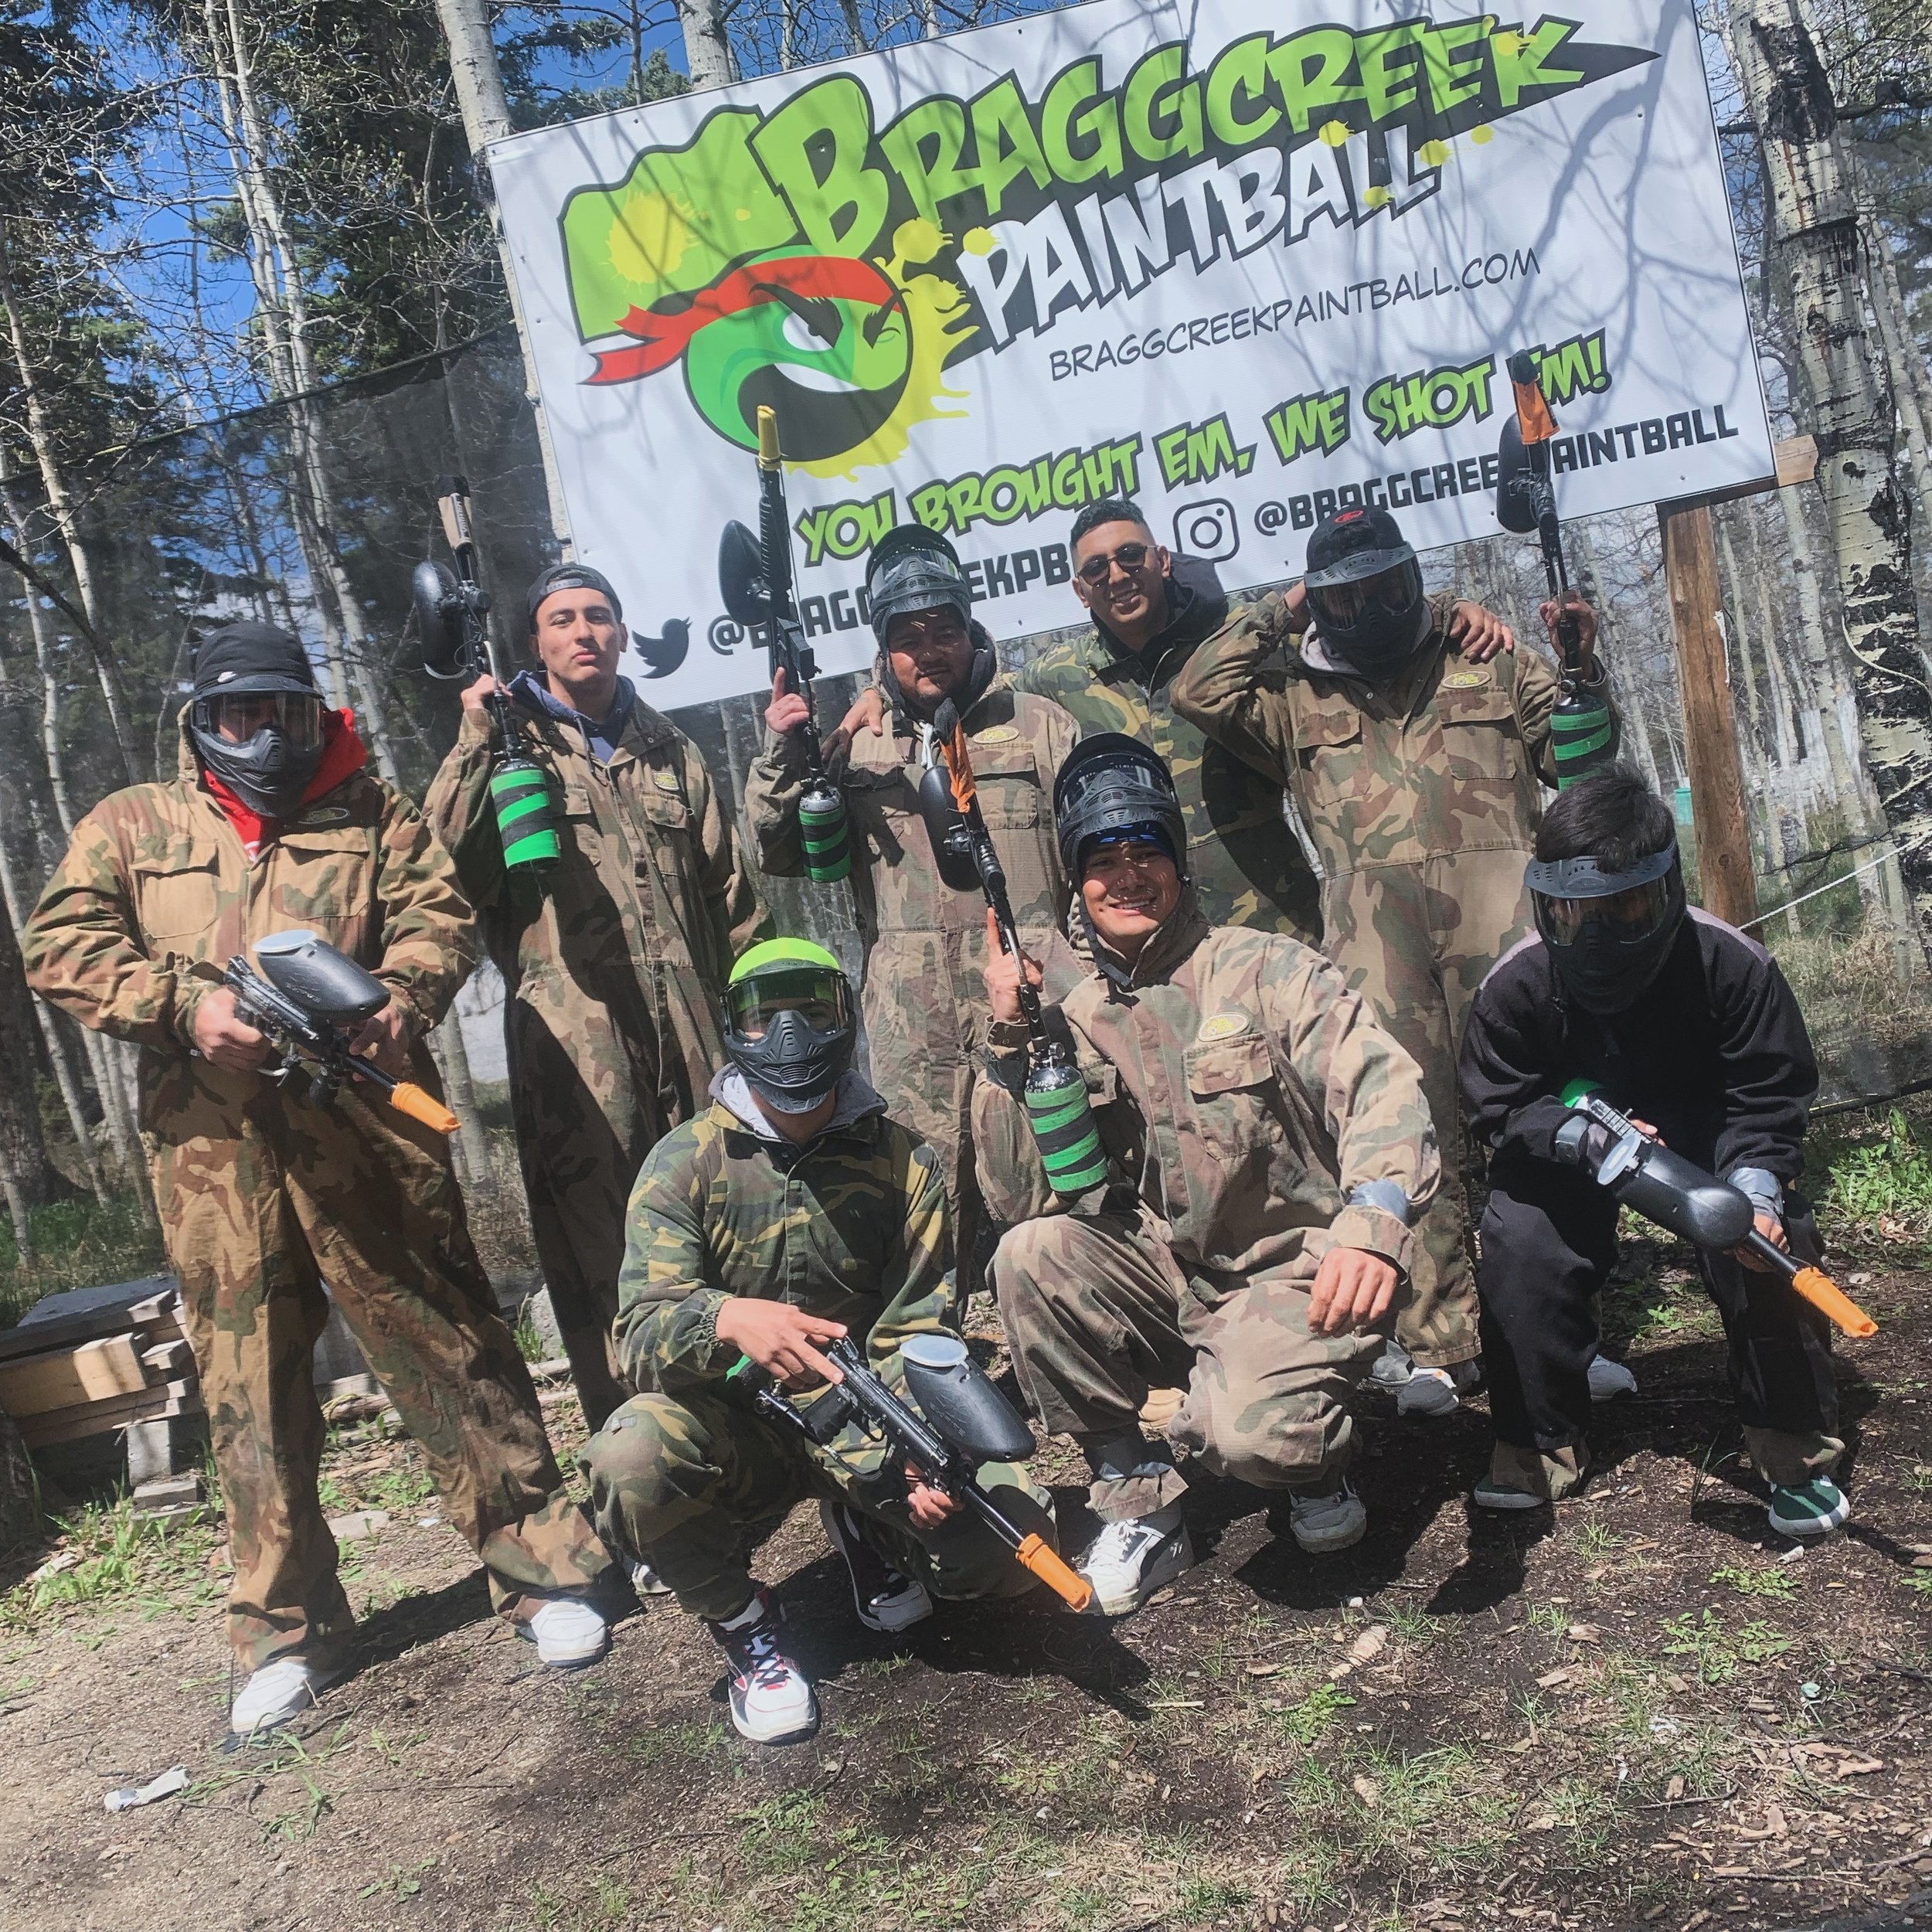 It&rsquo;s not too late to book your weekend paintball adventure! Call 403-483-4957 to reserve your group today 
 
 
 

 

#braggcreek #yyc #calgary #alberta #canada #outdoors #extremesports #paintball  #growpaintball #paintball4life #paintballing #p